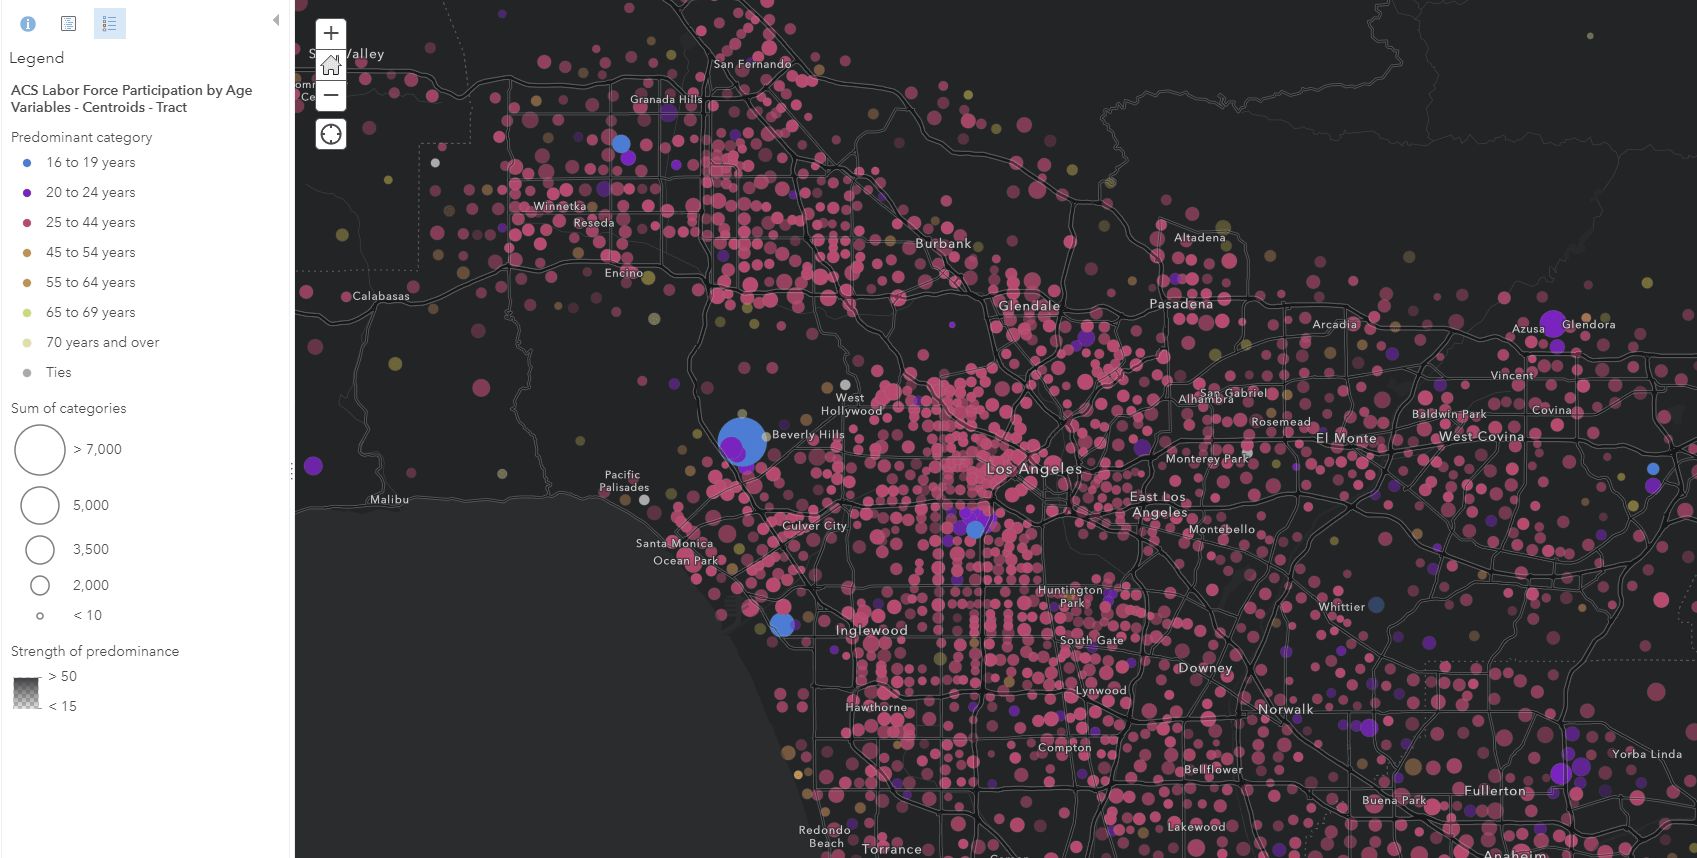 Predominance & size map of tracts in Los Angeles.